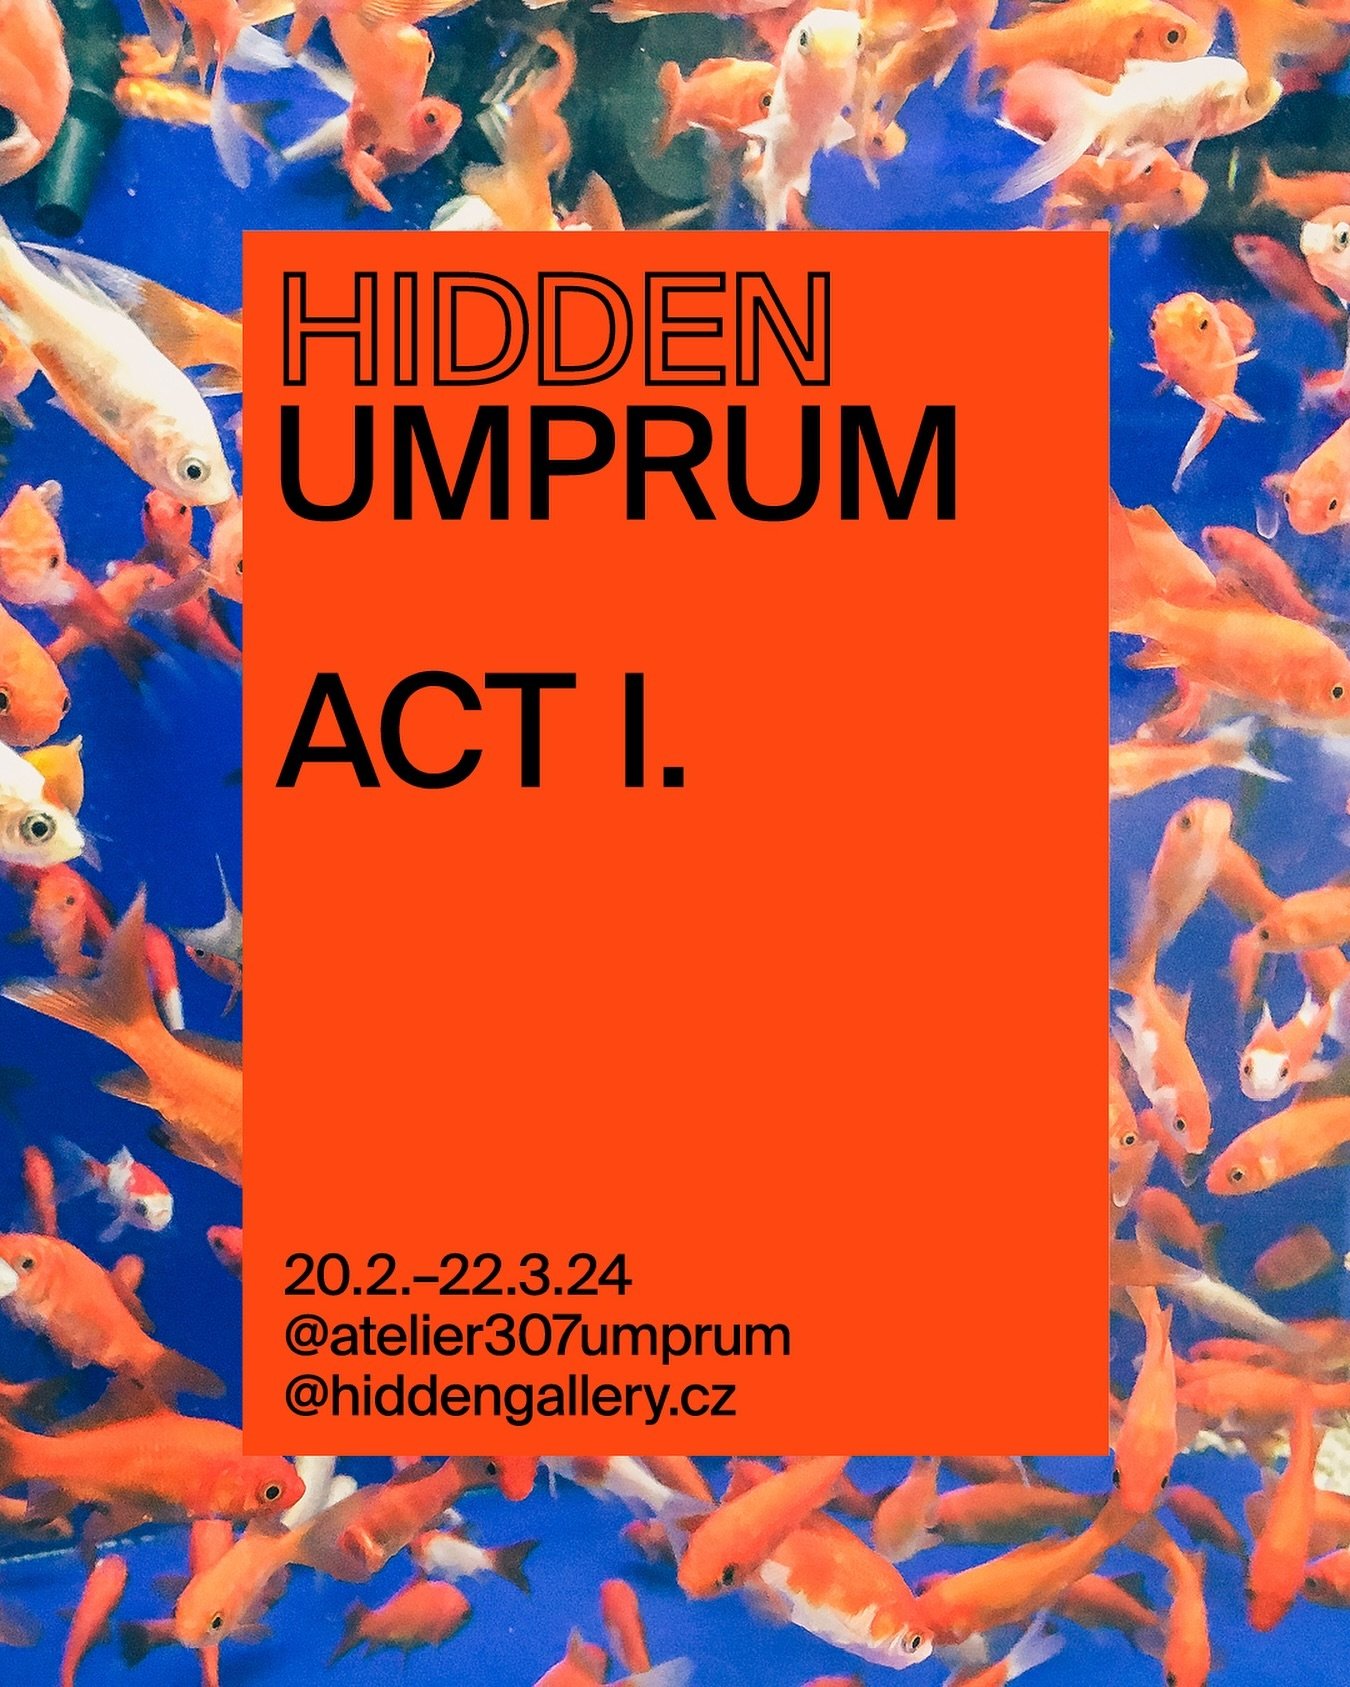 Excited to reveal our second opening of two at the brand new HIDDEN space in N&aacute;draž&iacute; Hole&scaron;ovice! 🎨 Join us for the group show of @atelier307umprum at HIDDEN UMPRUM, a dynamic collaboration with studio voln&eacute; uměn&iacute; I